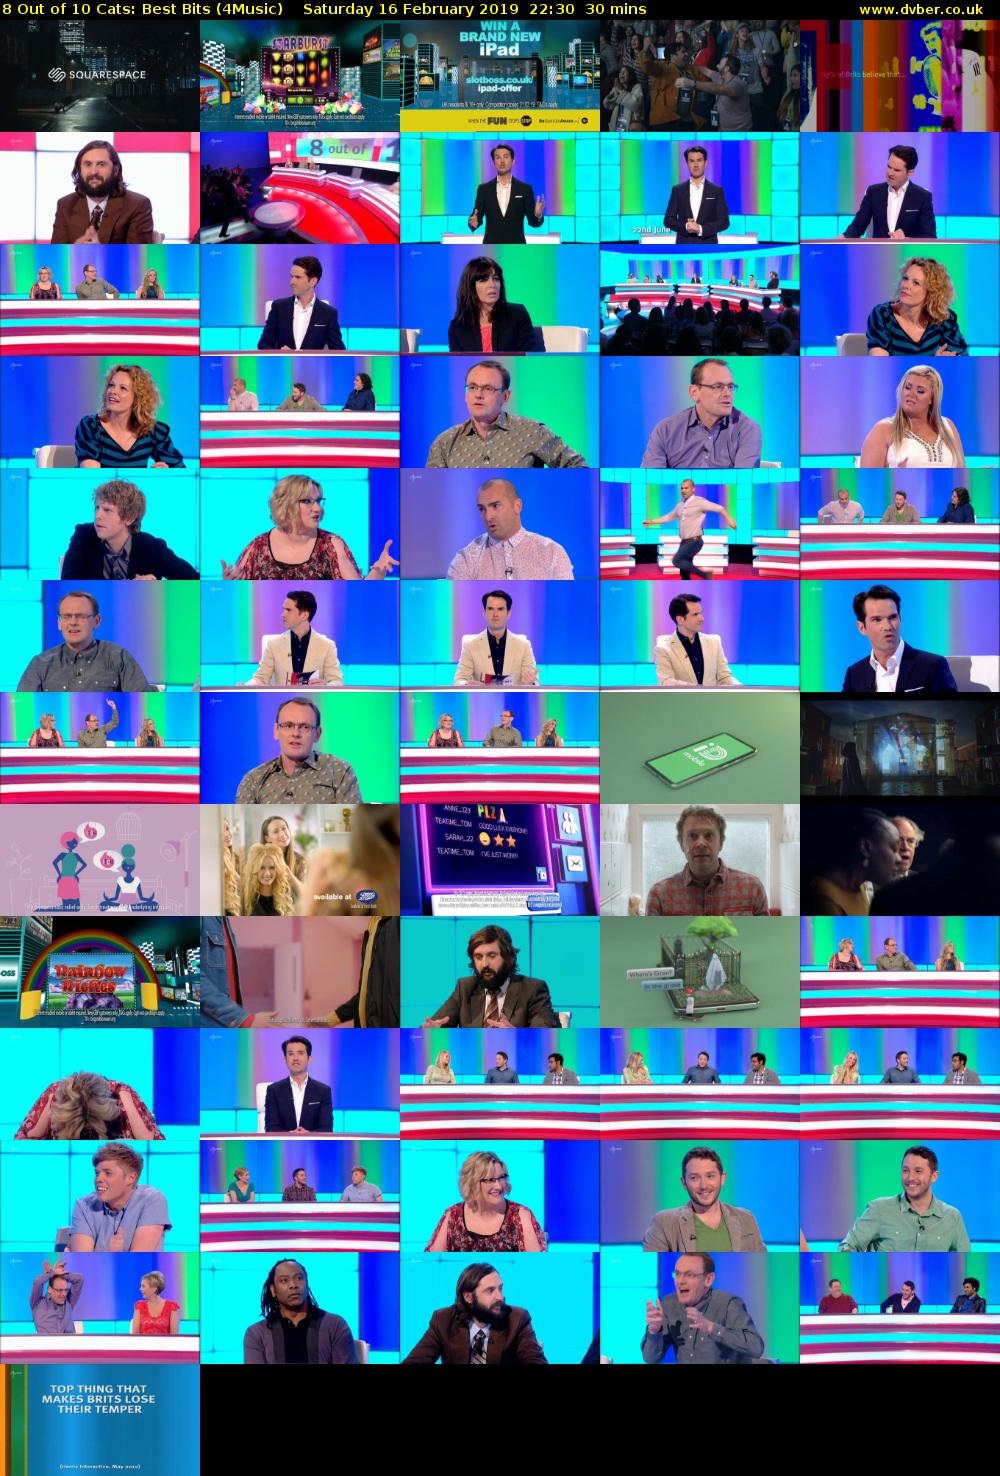 8 Out of 10 Cats: Best Bits (4Music) Saturday 16 February 2019 22:30 - 23:00